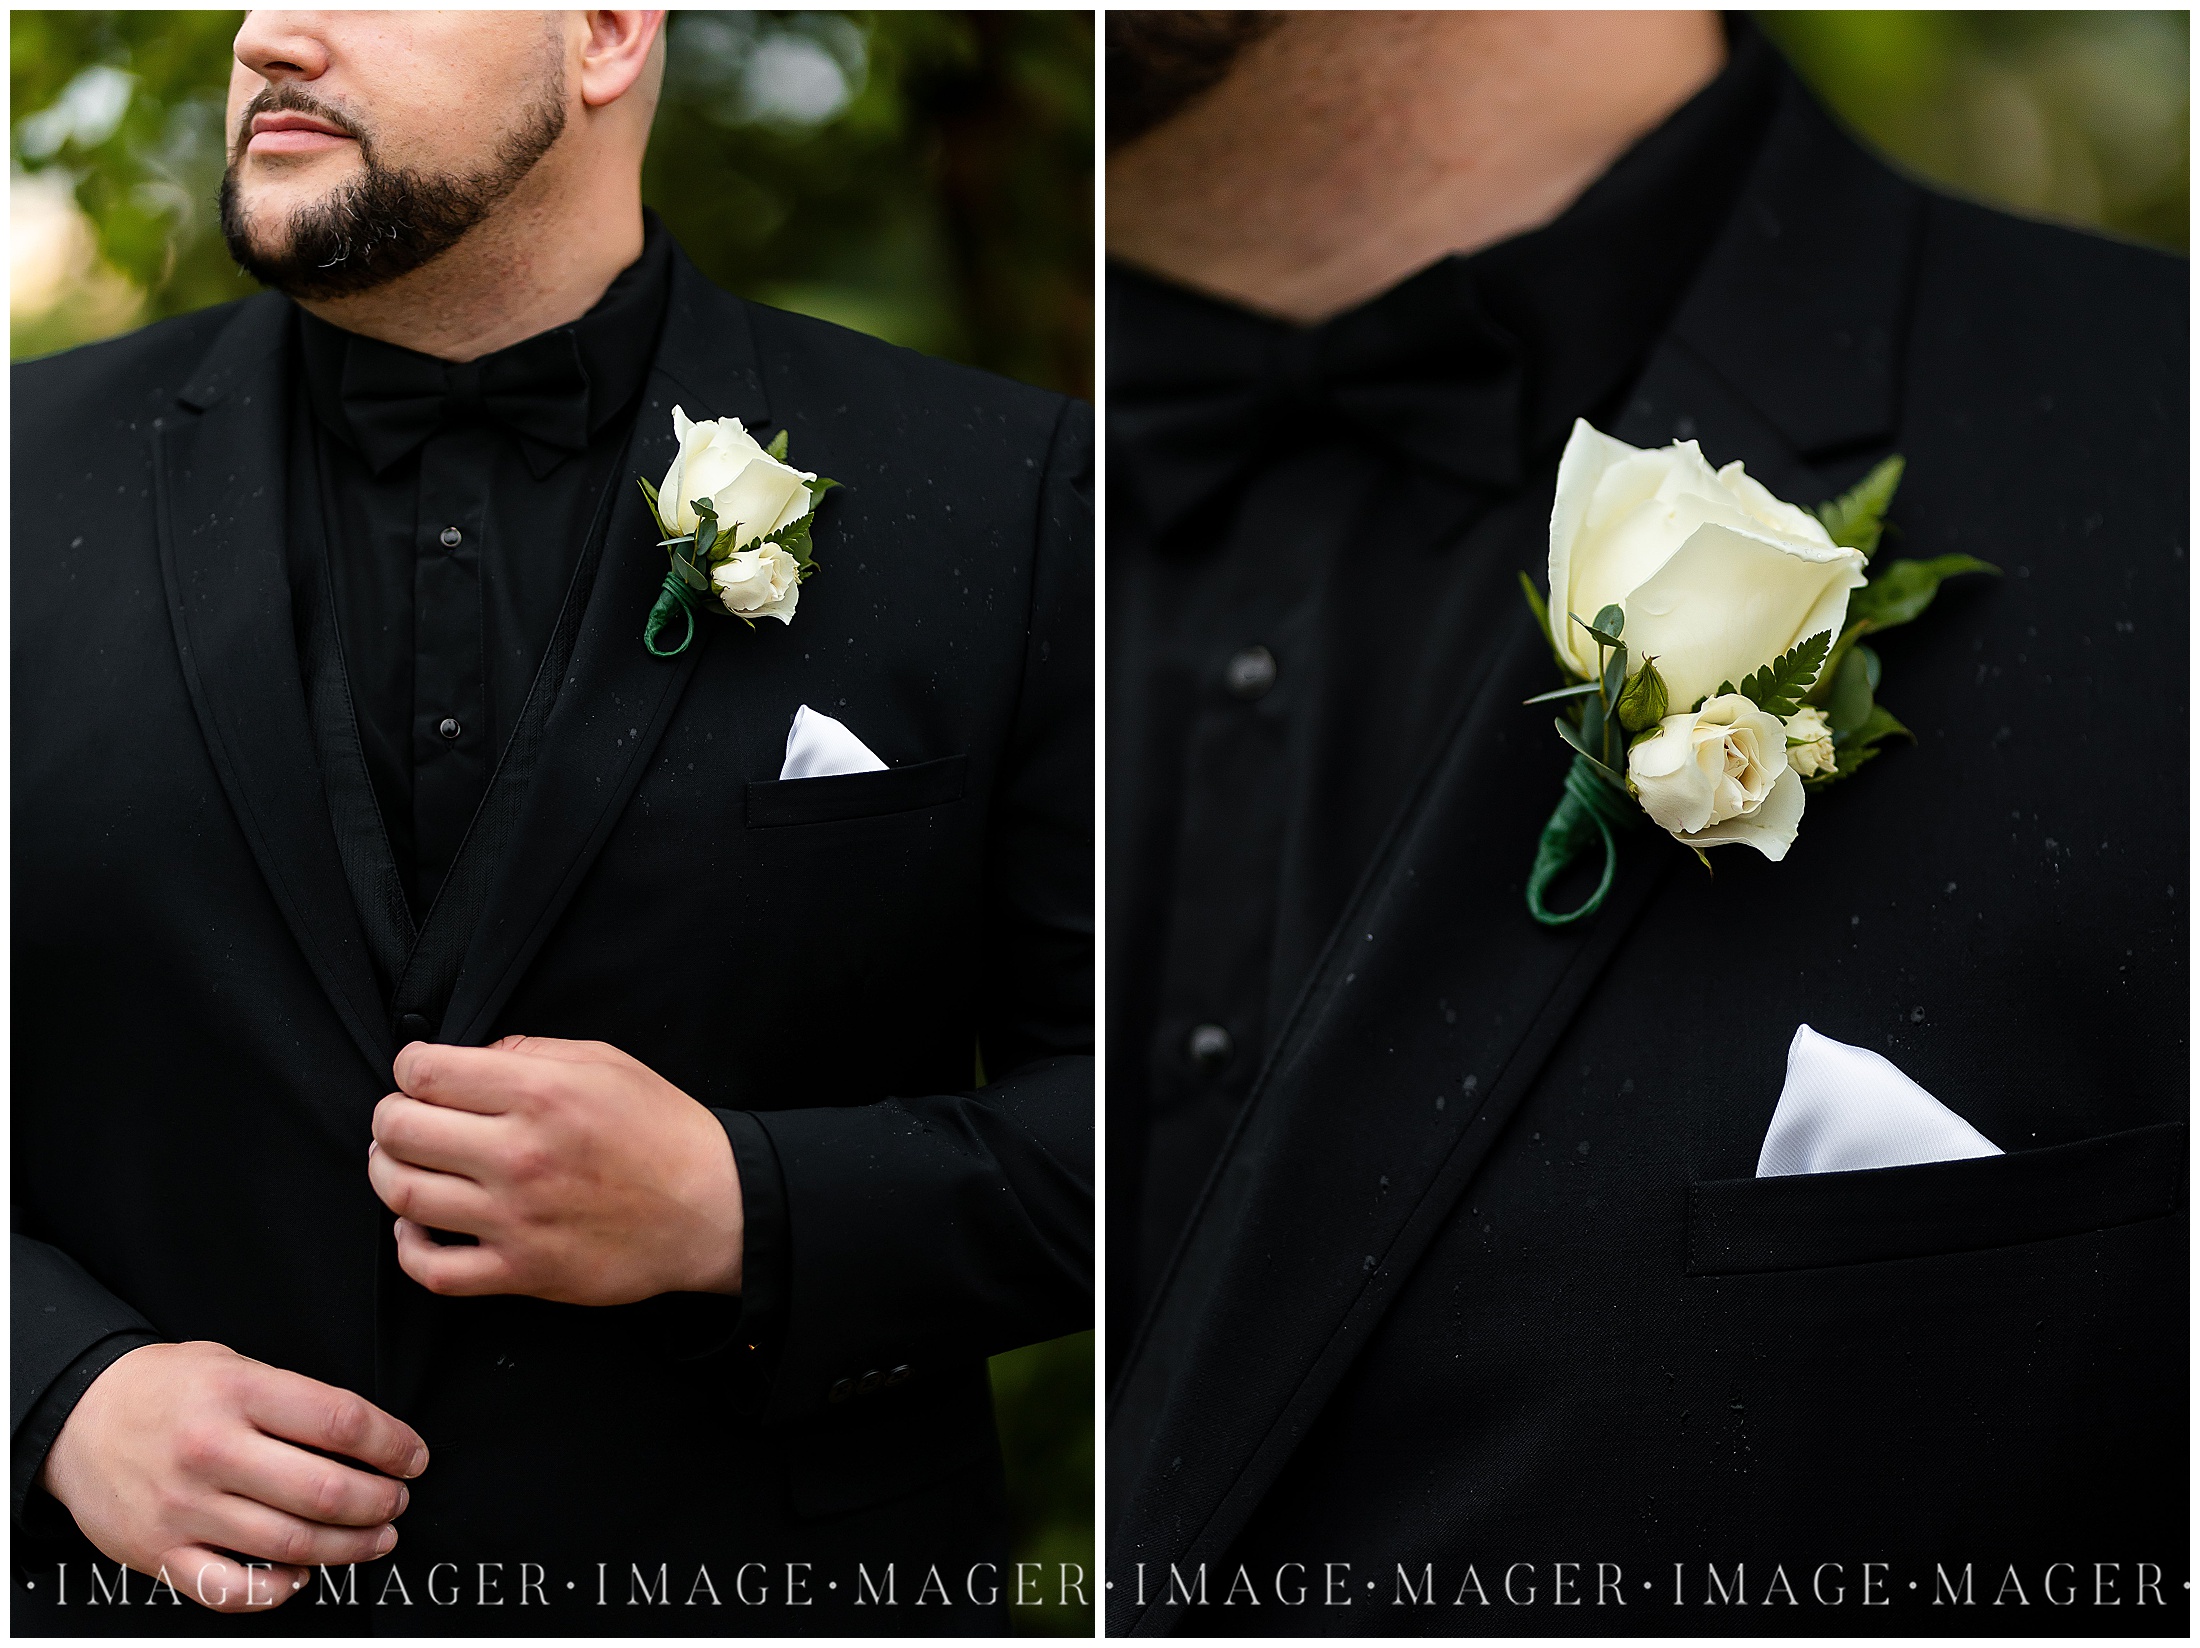 Ethan's Classic Tuxedo with Gold Details